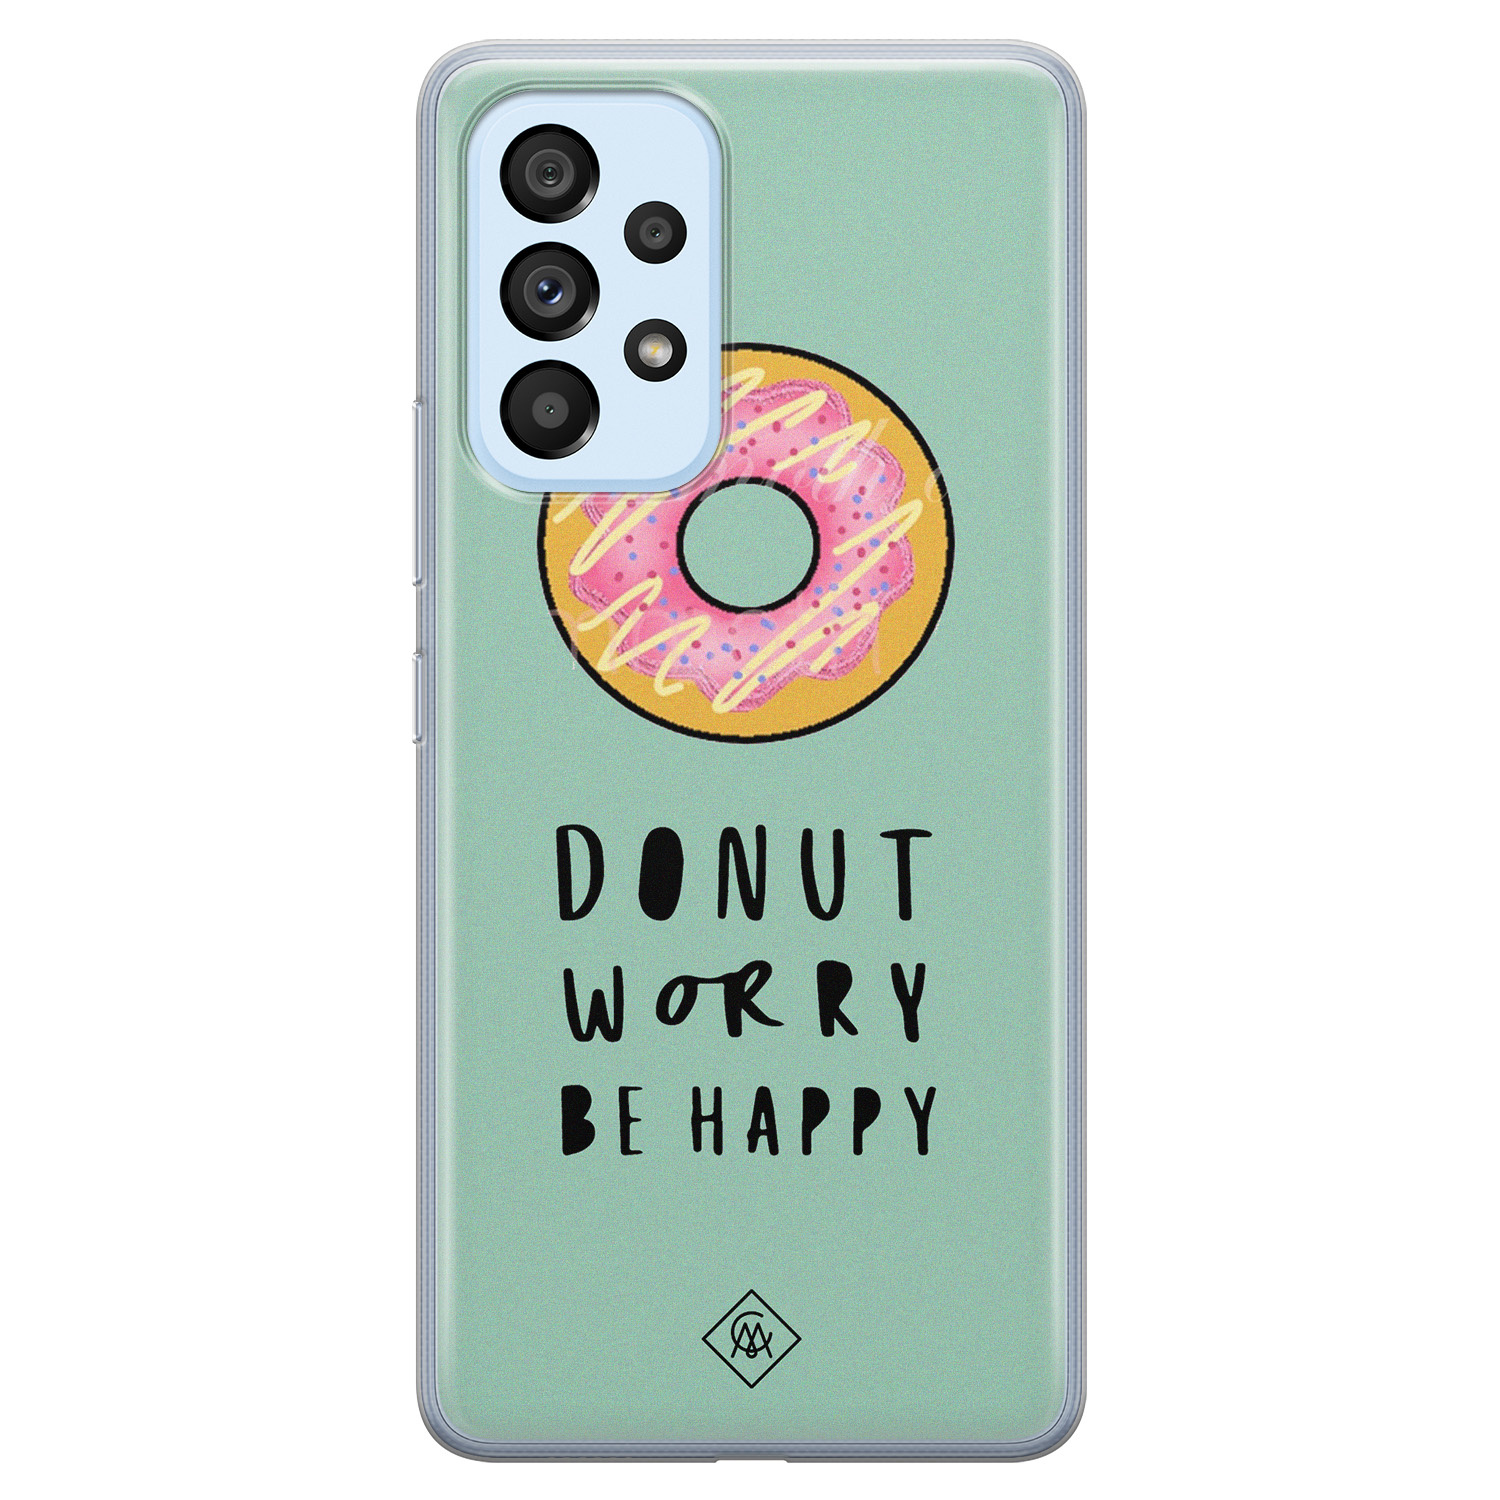 Samsung Galaxy A33 siliconen hoesje - Donut worry